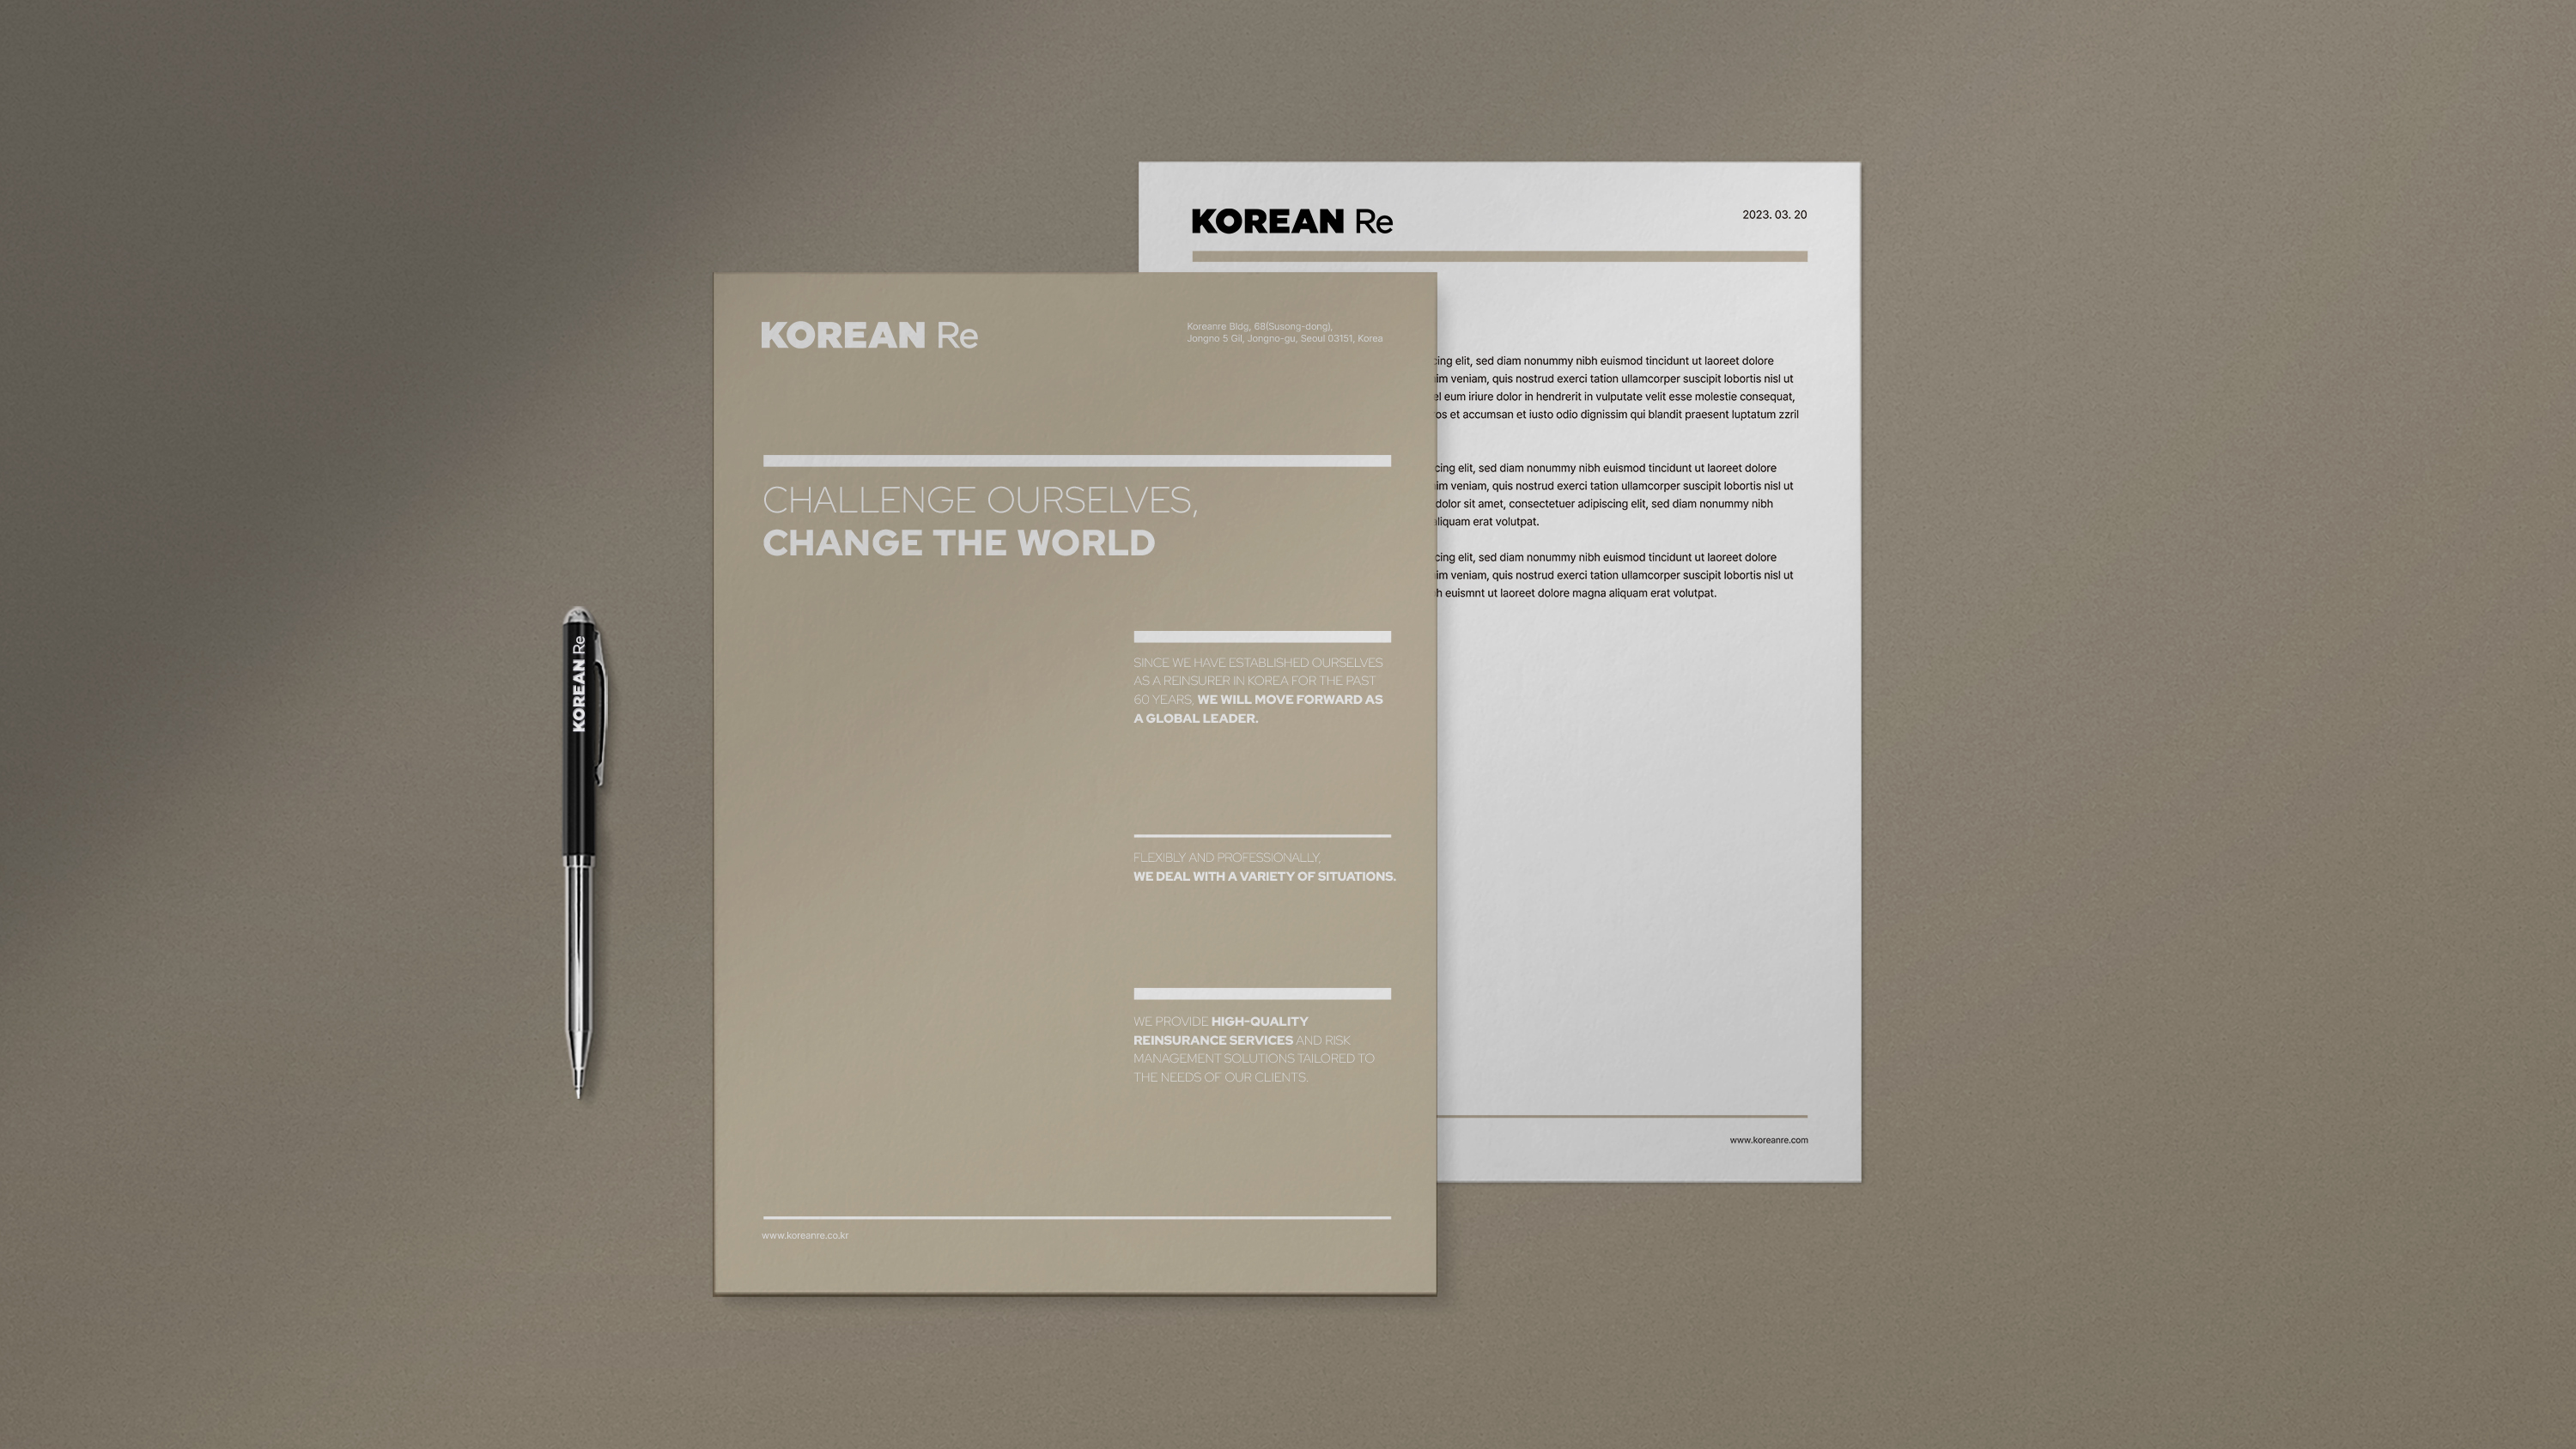 Challenge Ourselves, Change the World by Korean Re